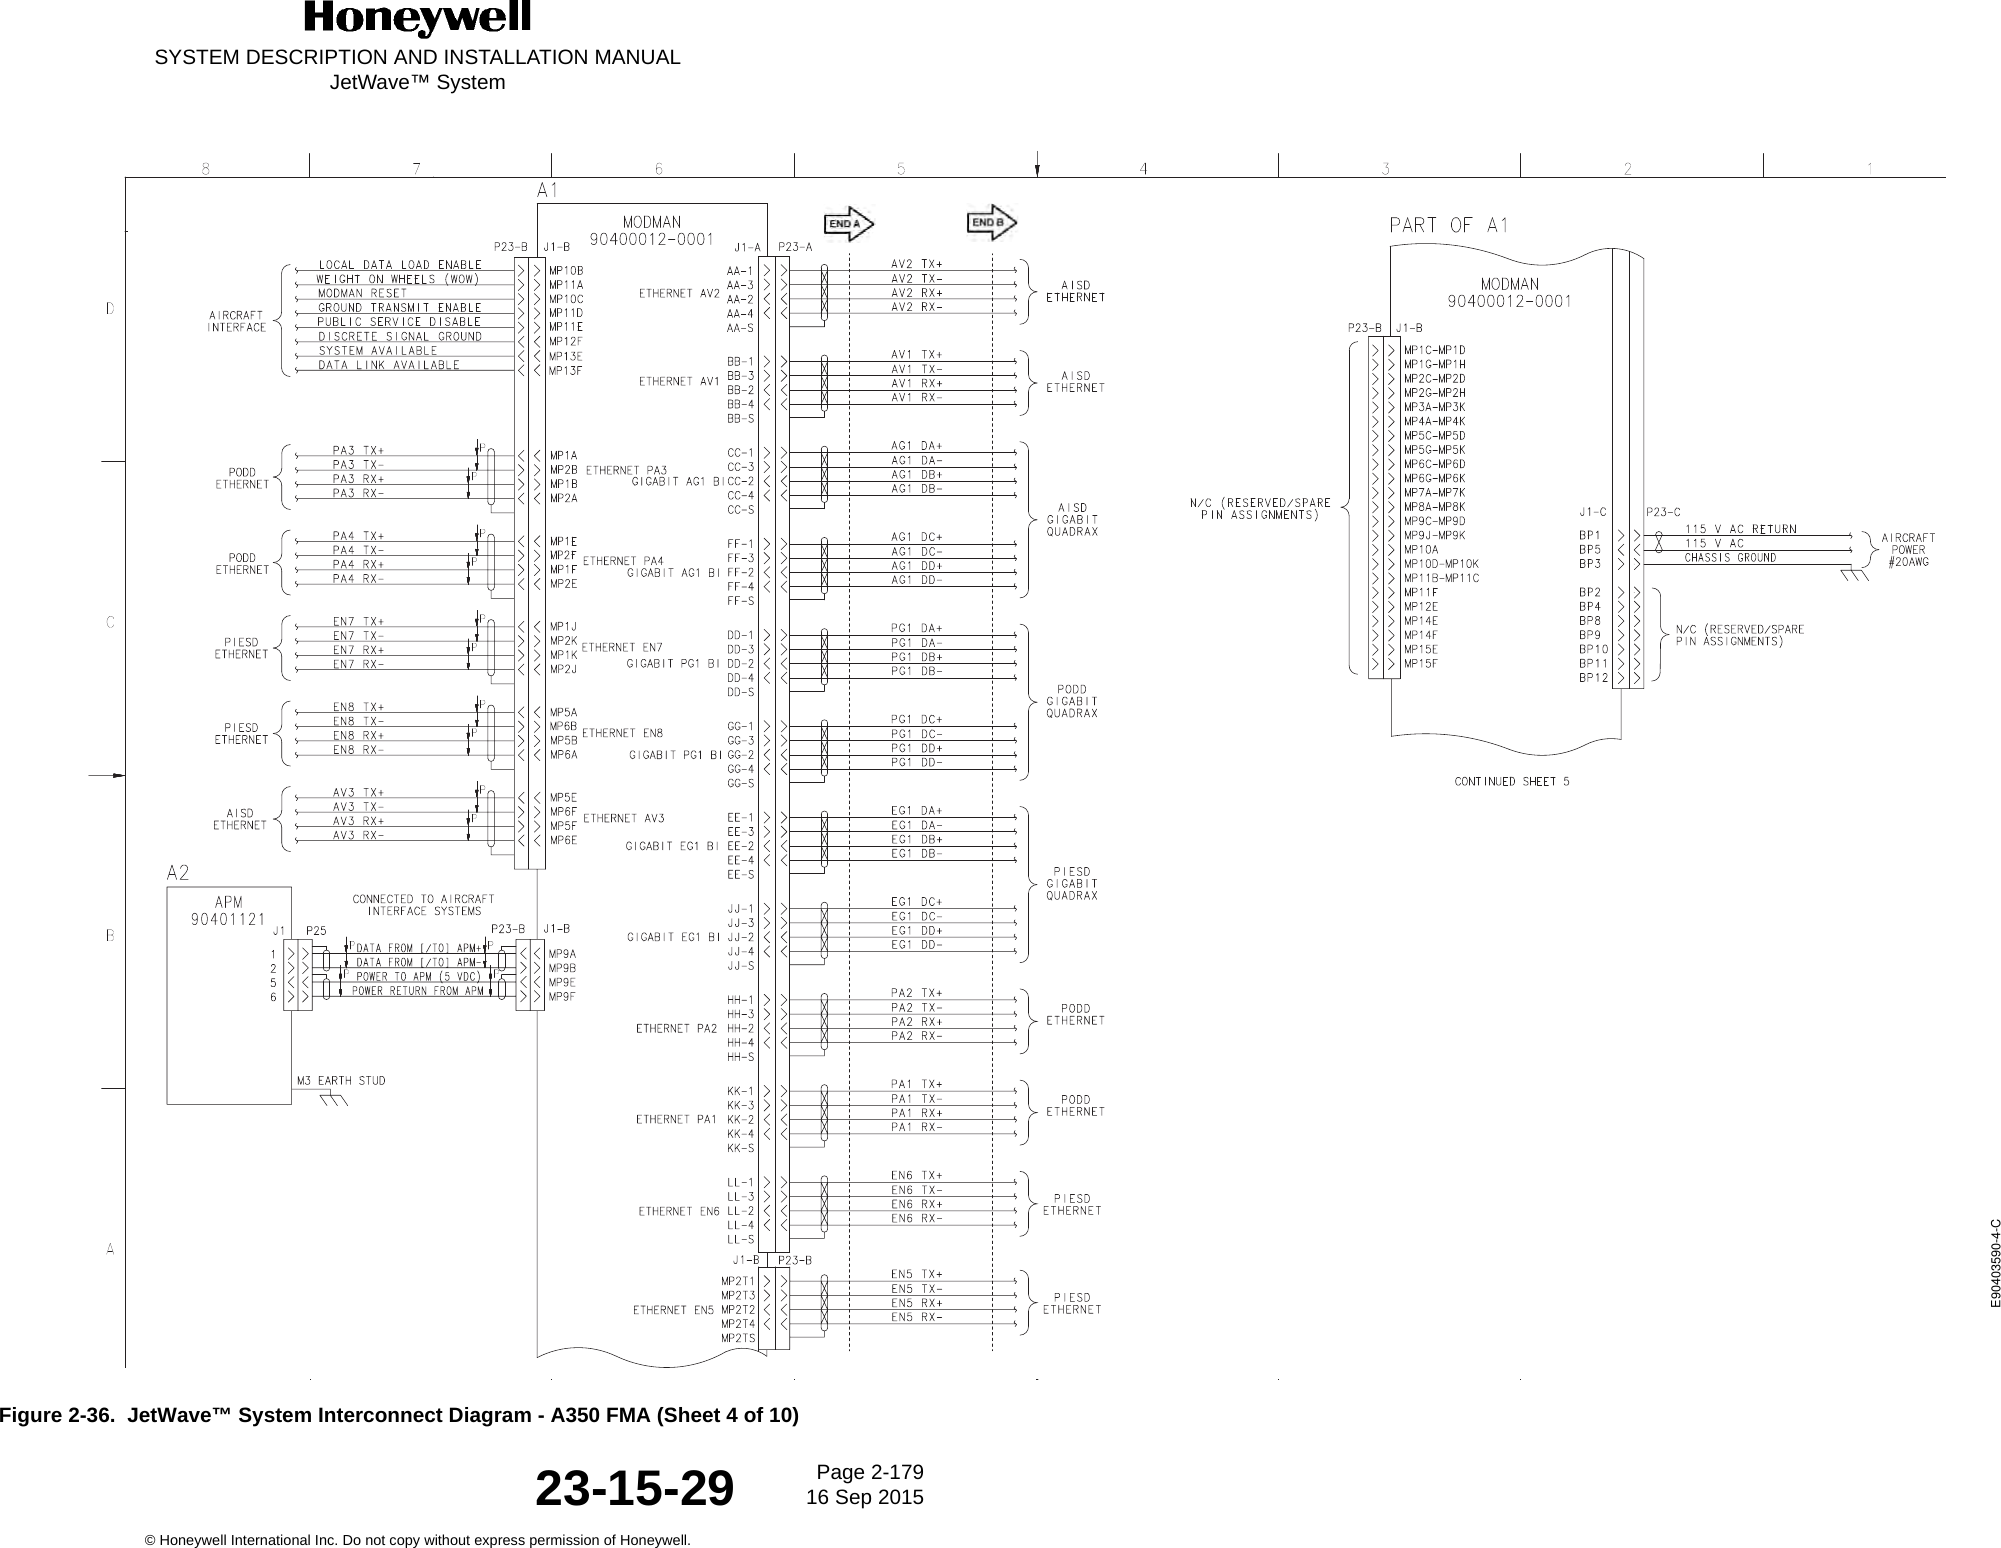 SYSTEM DESCRIPTION AND INSTALLATION MANUALJetWave™ SystemPage 2-179 16 Sep 2015© Honeywell International Inc. Do not copy without express permission of Honeywell.23-15-29Figure 2-36.  JetWave™ System Interconnect Diagram - A350 FMA (Sheet 4 of 10)E90403590-4-C